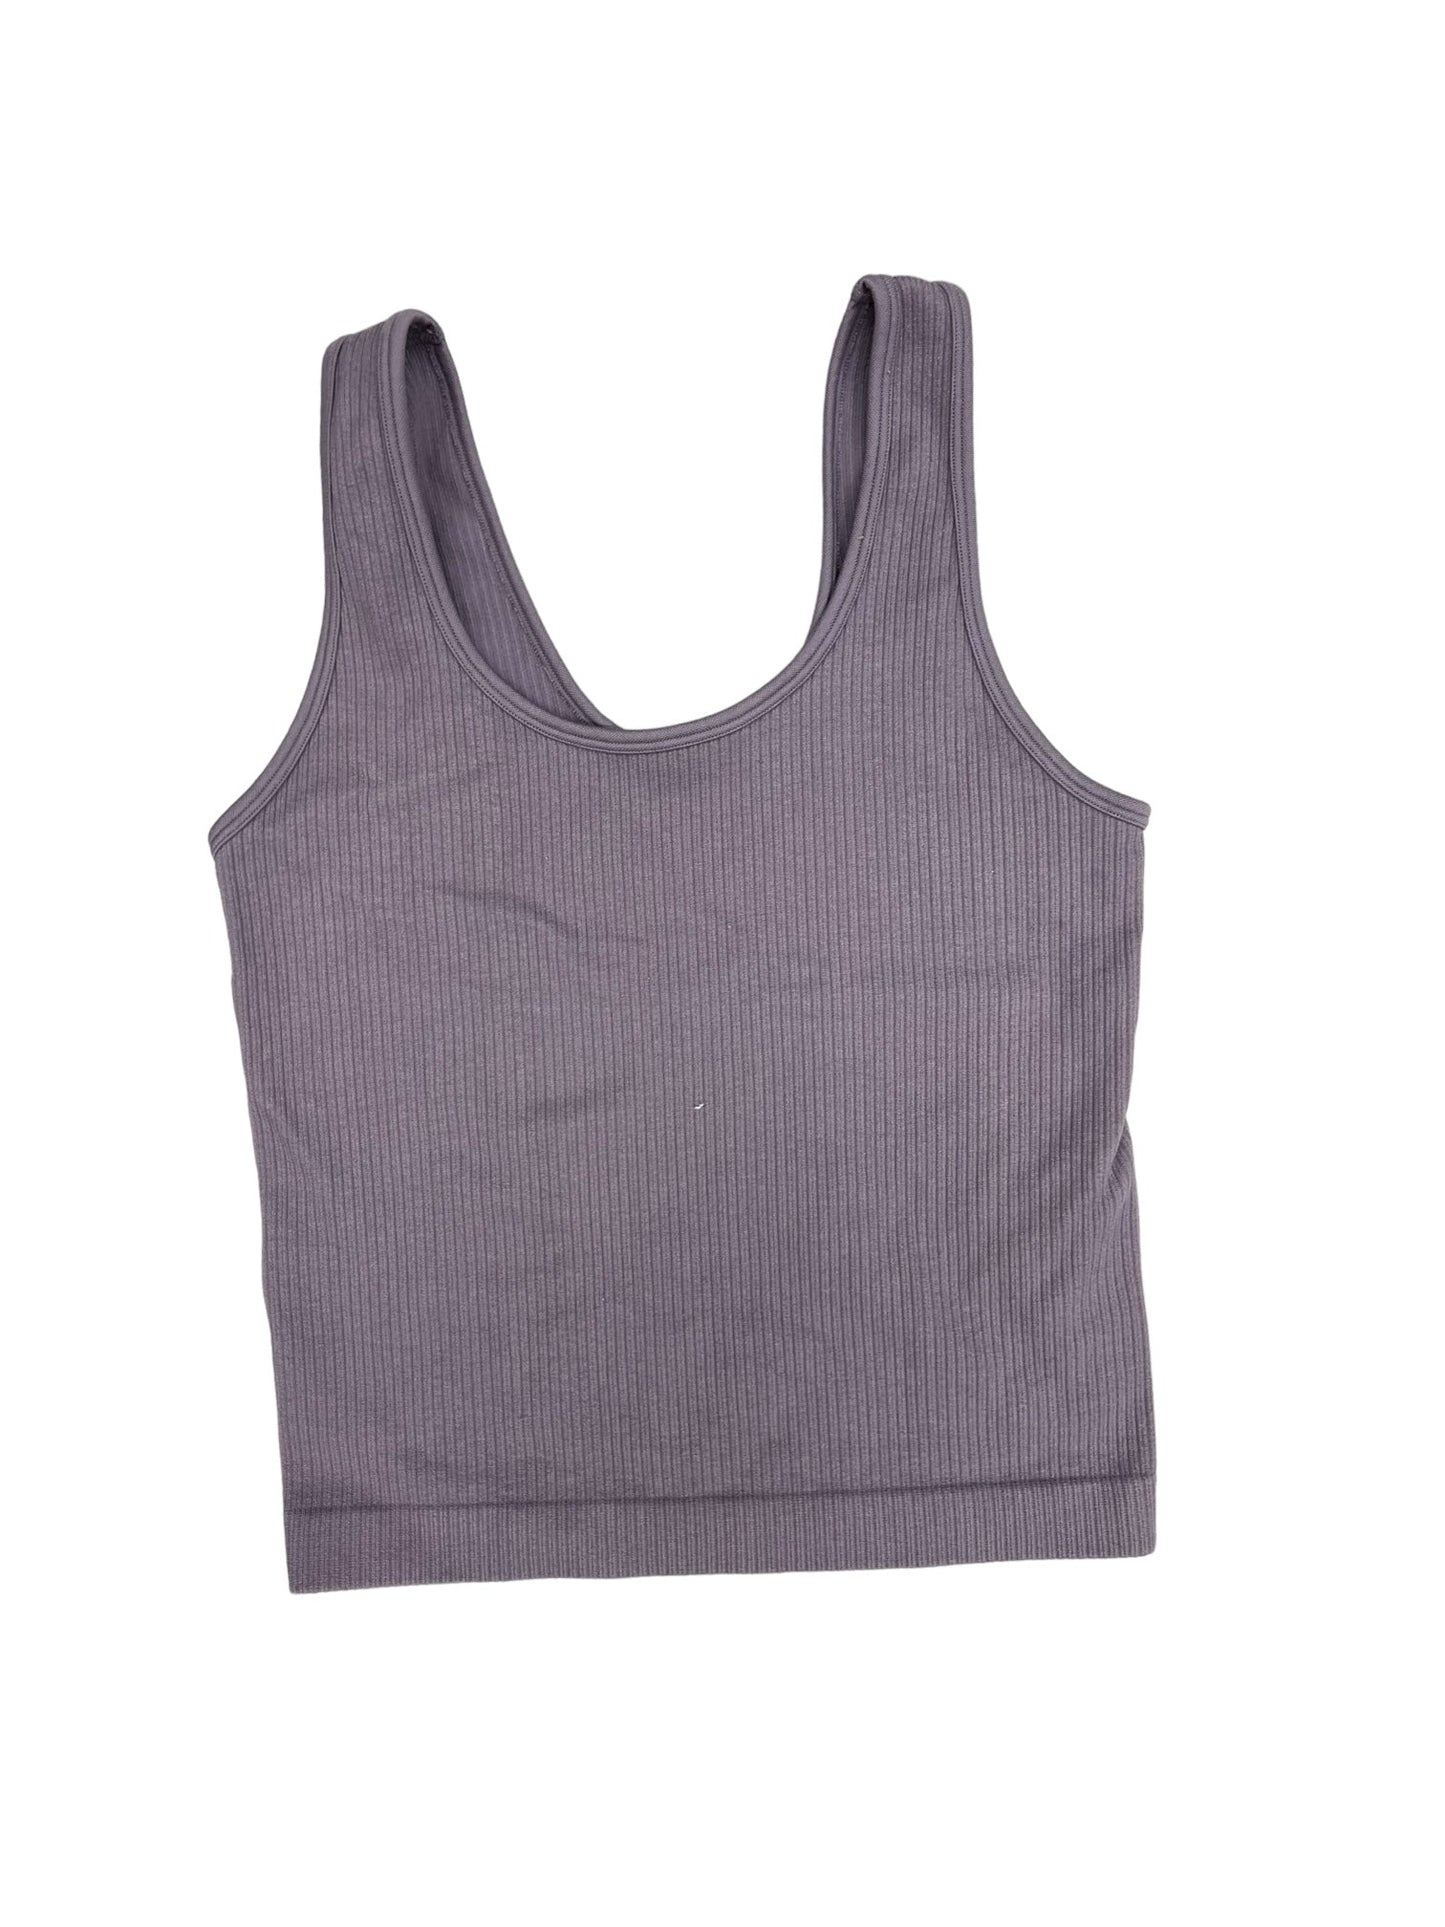 Purple Athletic Tank Top A New Day, Size S